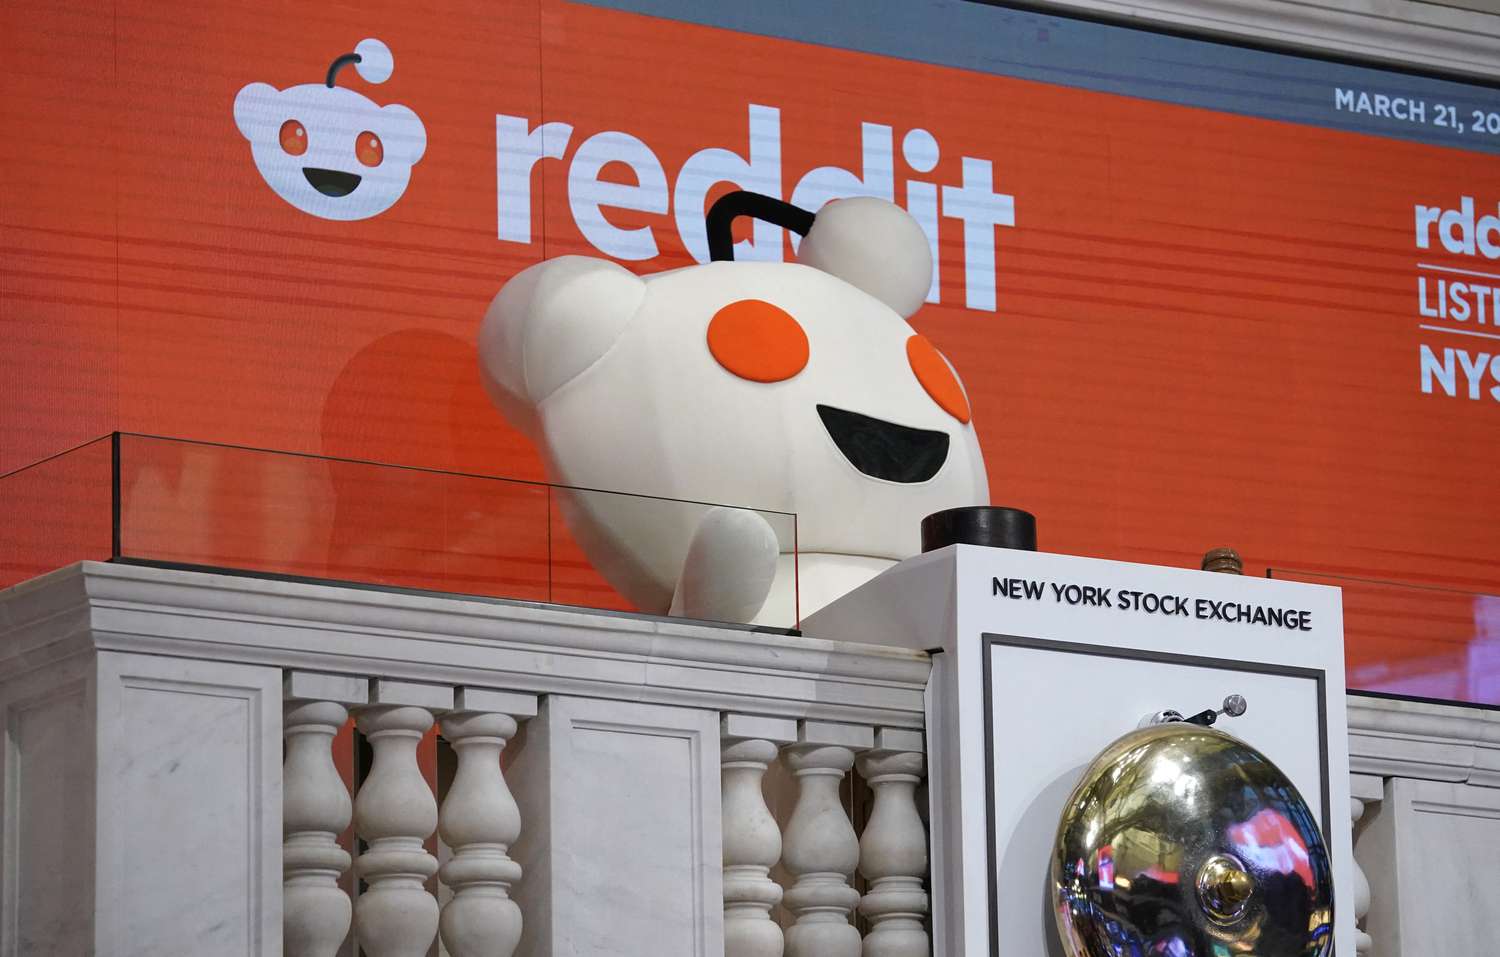 What You Need To Know Ahead of Reddit